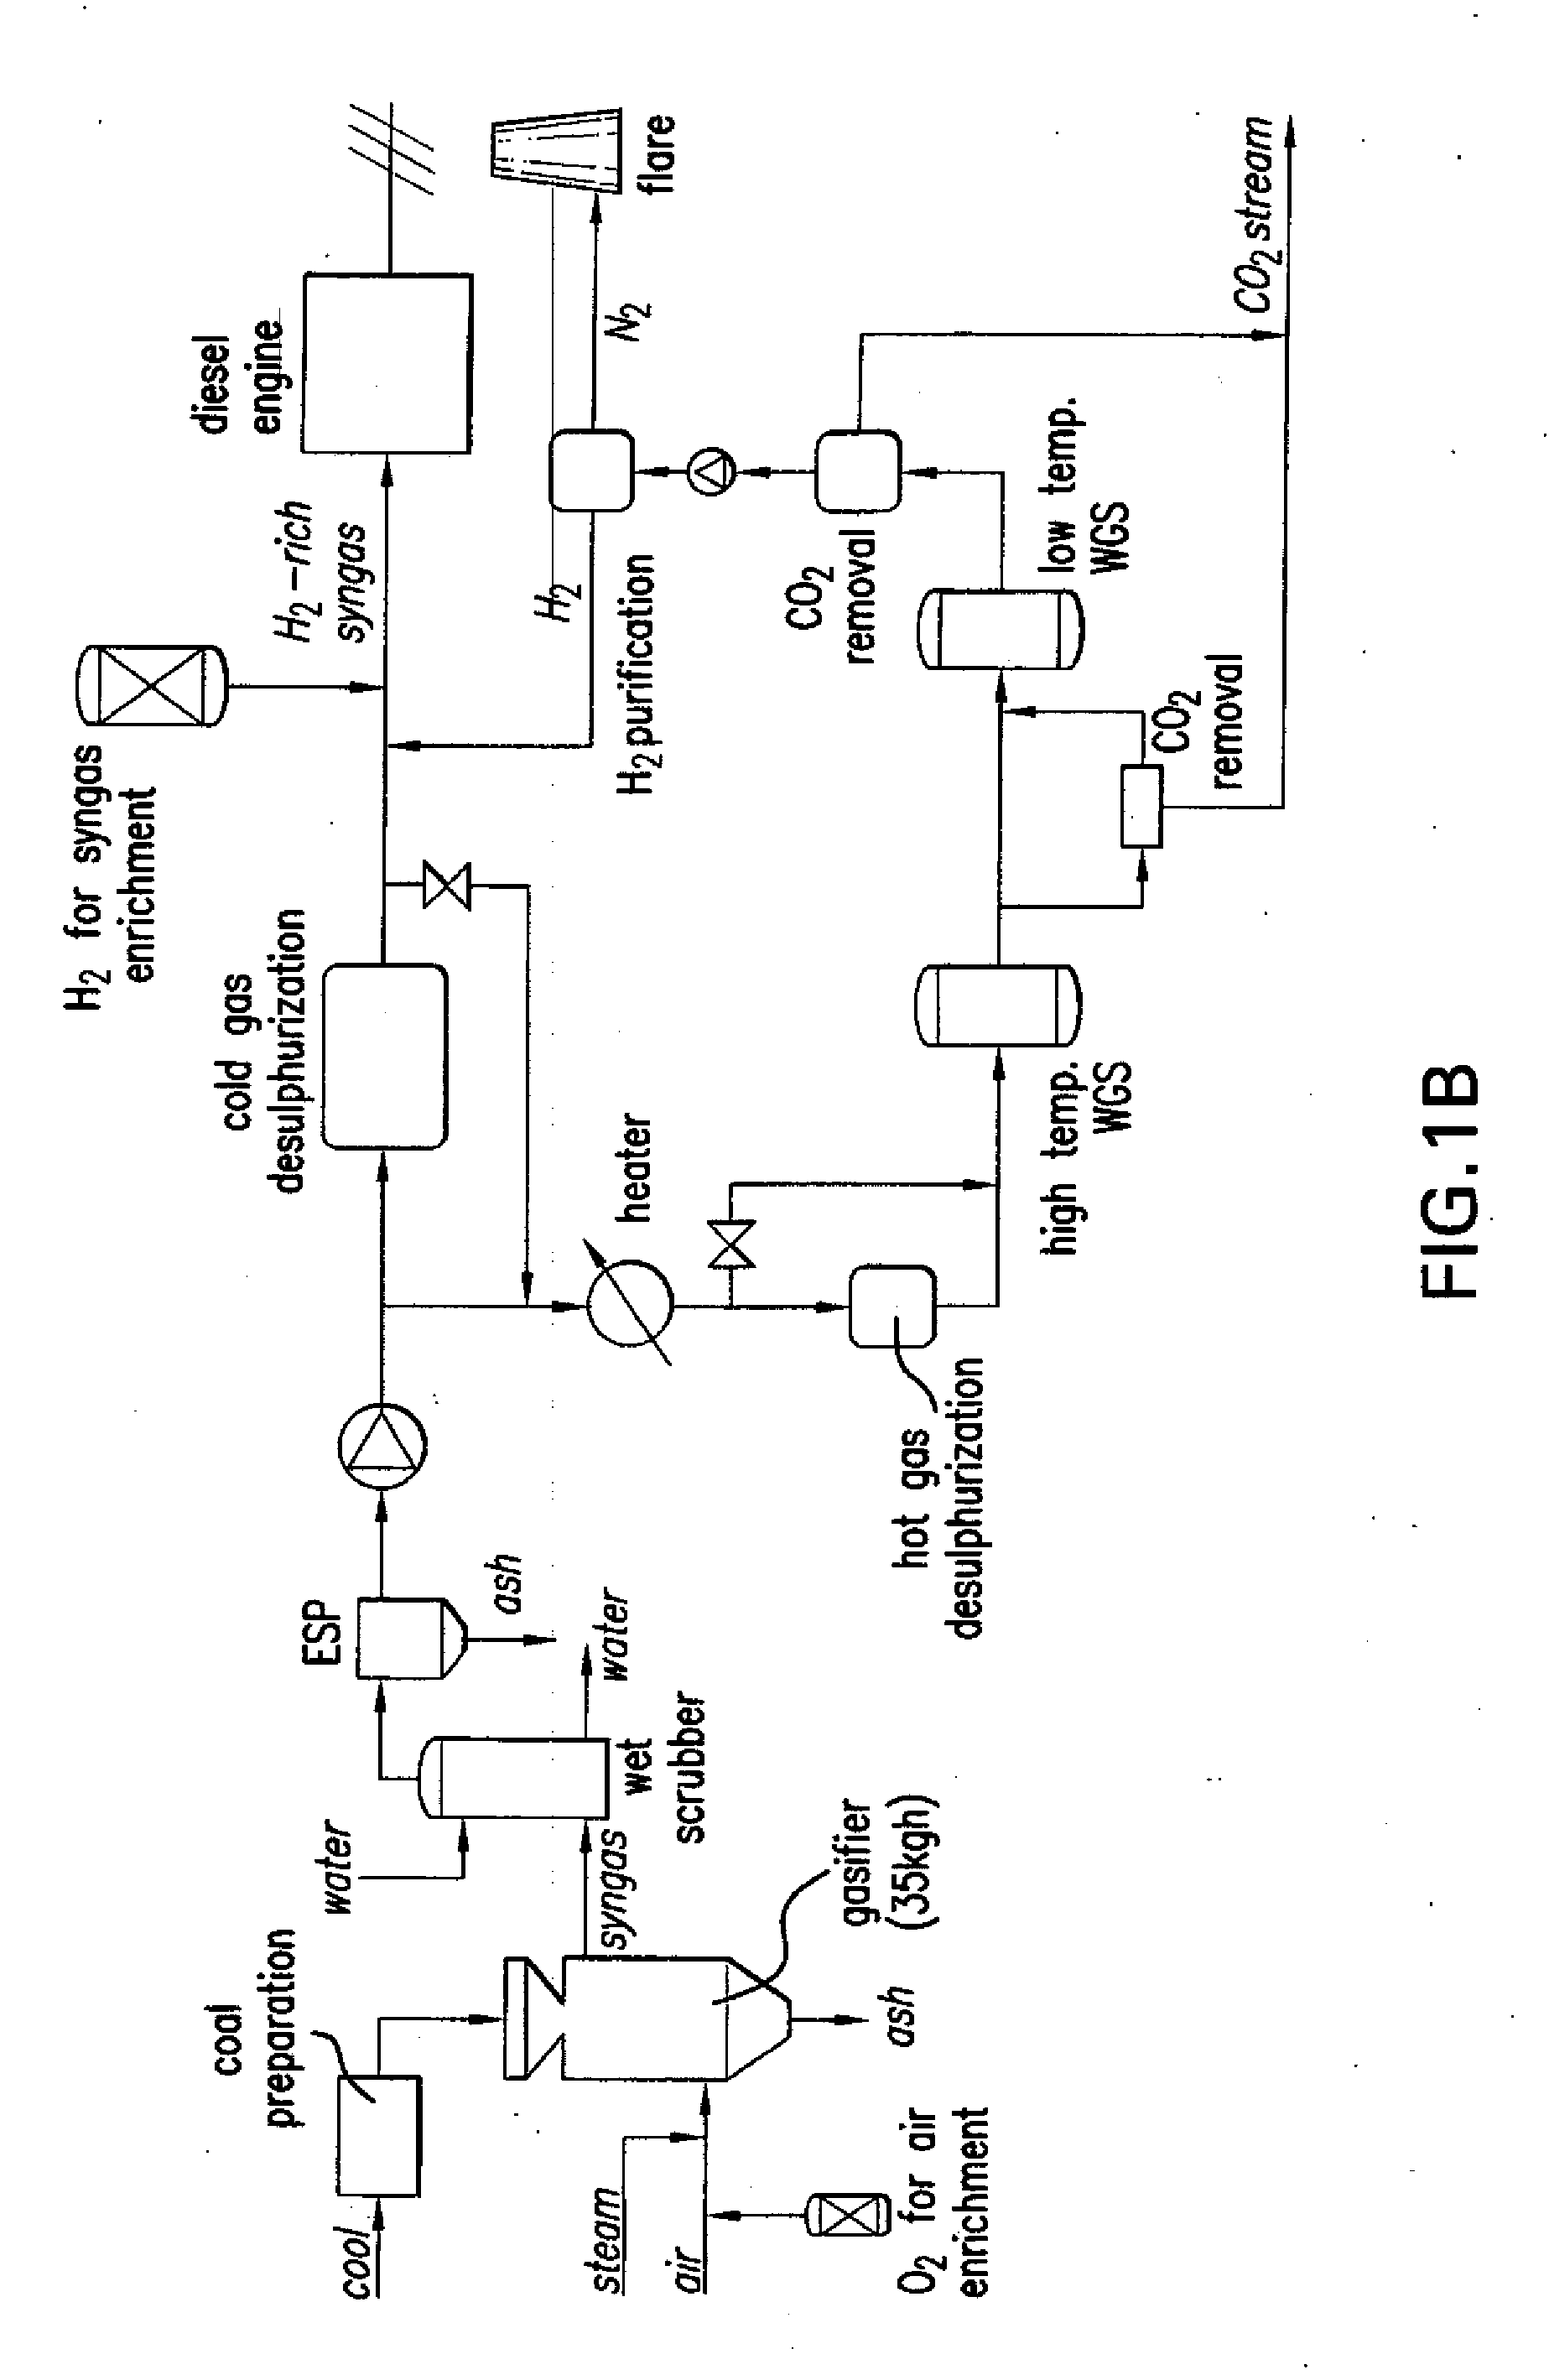 Method and apparatus for using frozen carbon dioxide blocks or cylinders to recover oil from abandoned oil wells